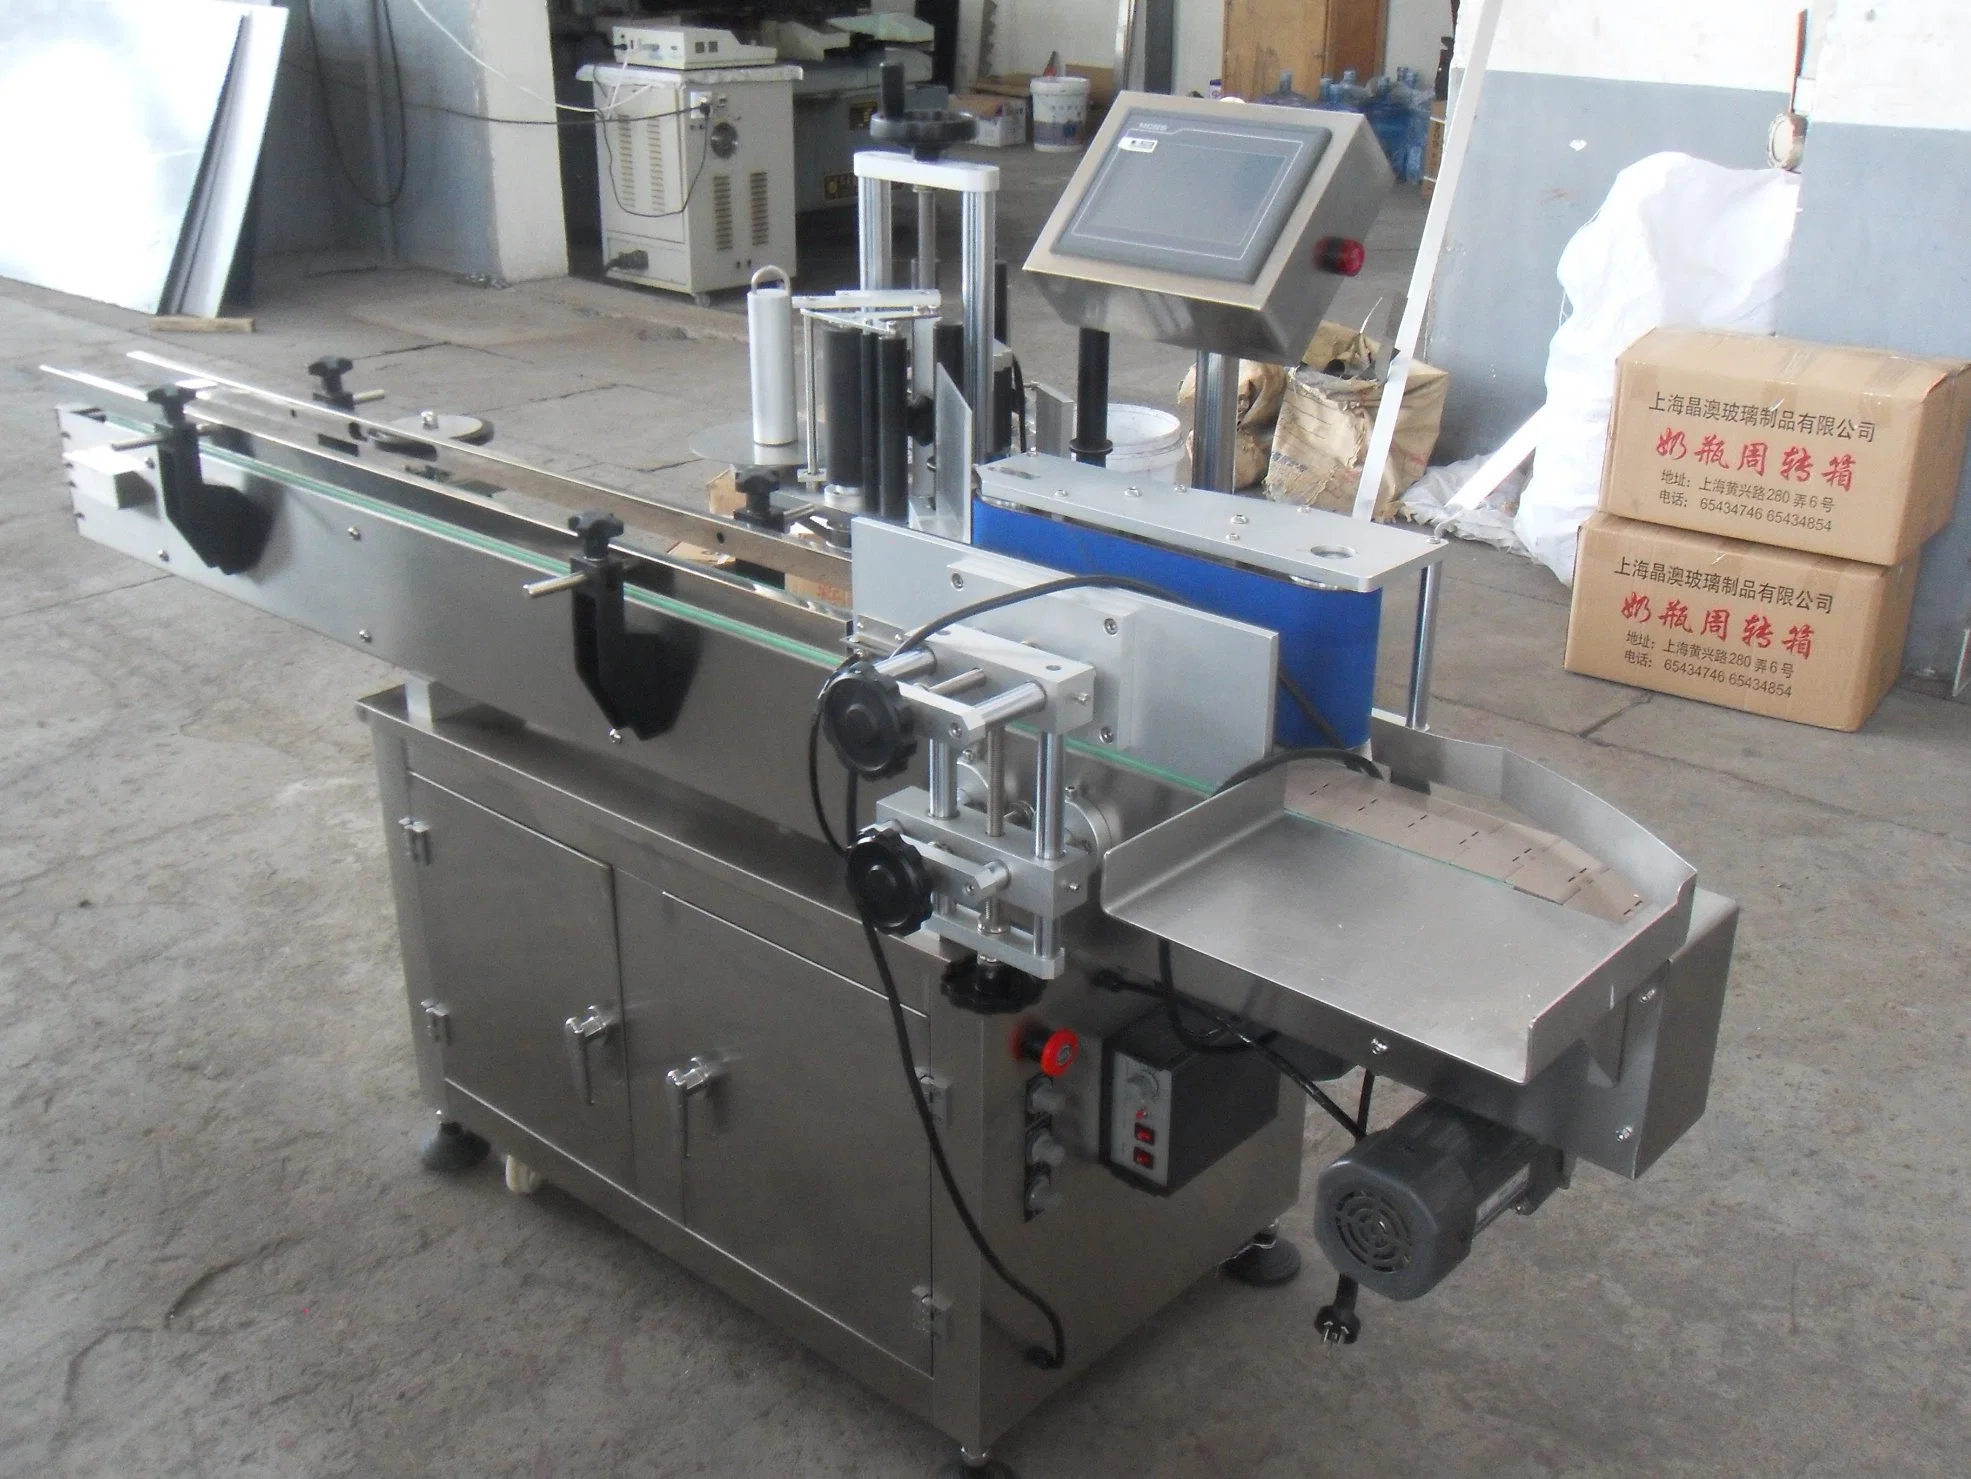 Labeling Machine Widely Used in Electronics, Beverages, Printing and Other Industries